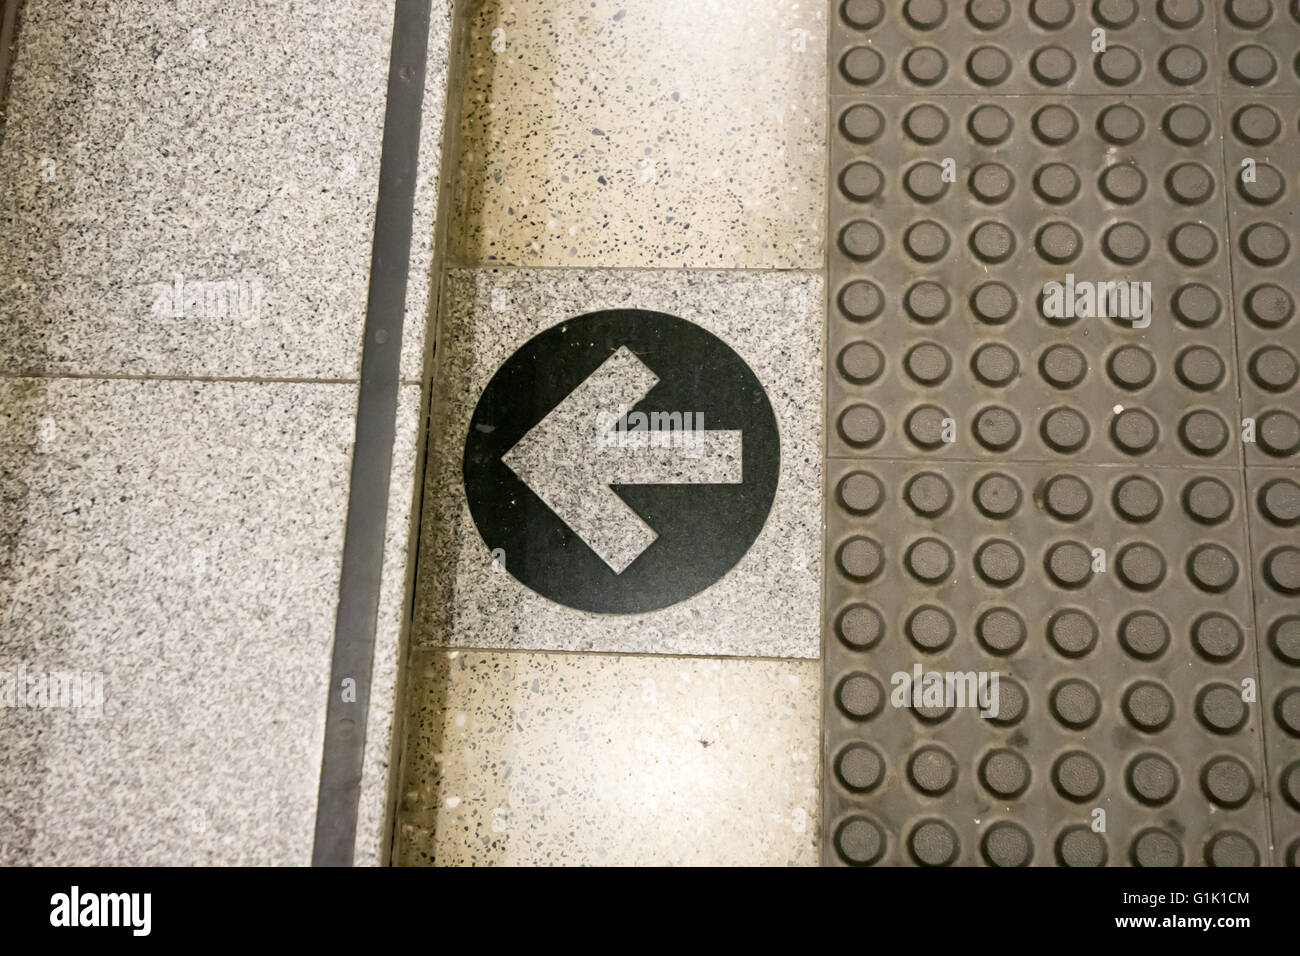 Printed arrow on floor direction to steps Stock Photo